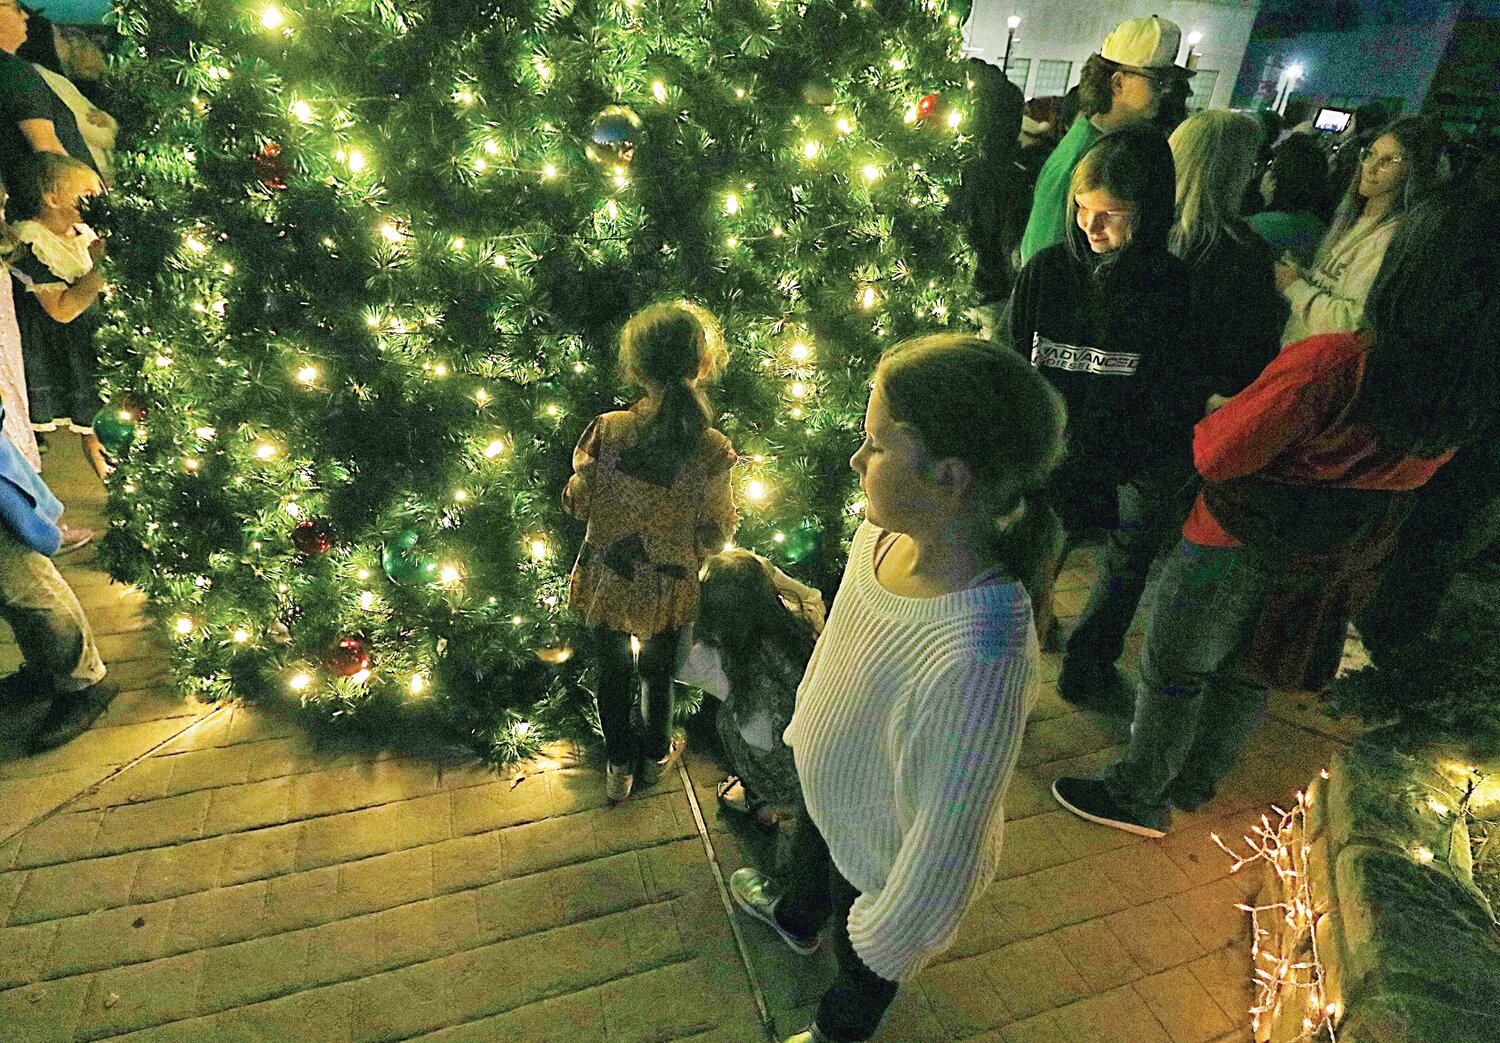 Kids take a closer look at the Christmas tree.